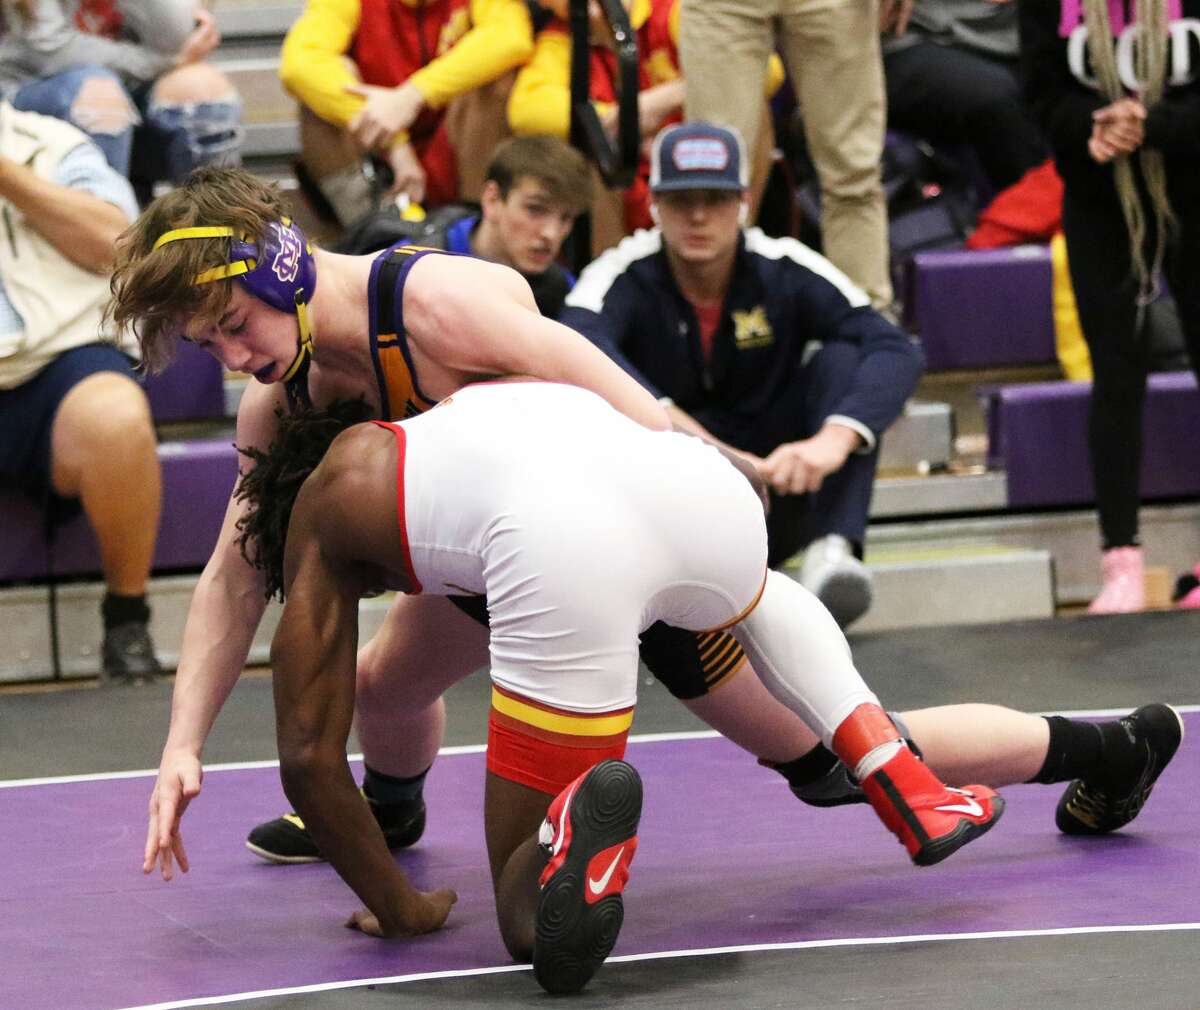 Murphysboro's Arojae Hart takes a shot on CM's Bryce Griffin in their 138-pound title bout at Saturday's Mascoutah Tourney.